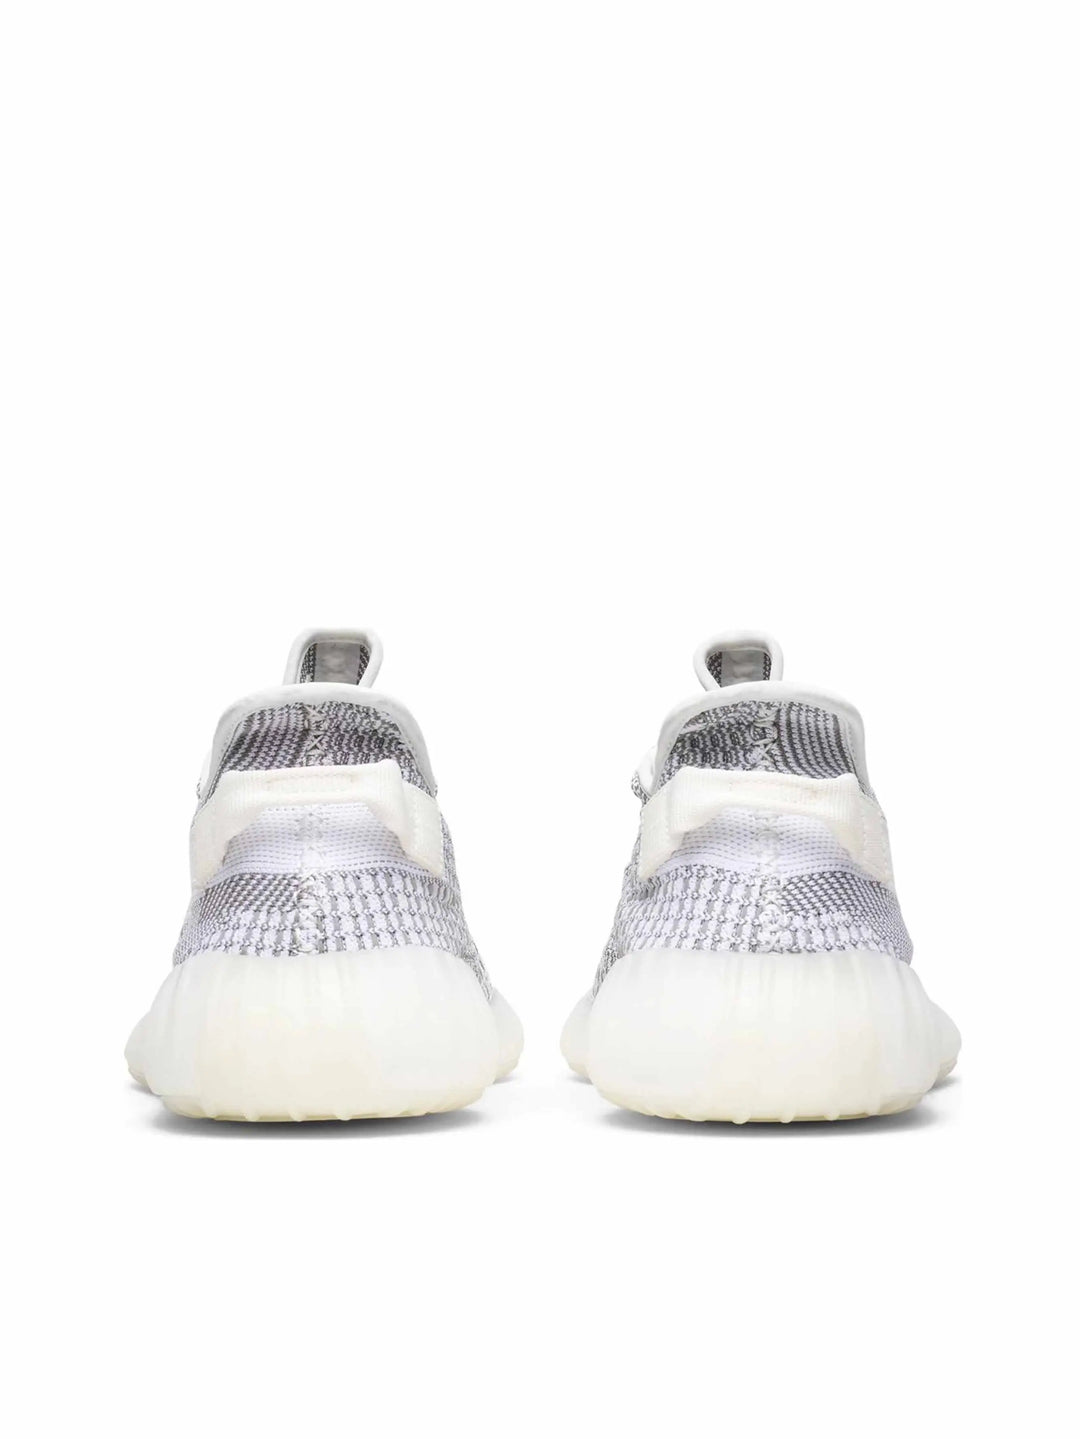 adidas Yeezy Boost 350 V2 Static (Non-Reflective) (2018/2023) Prior